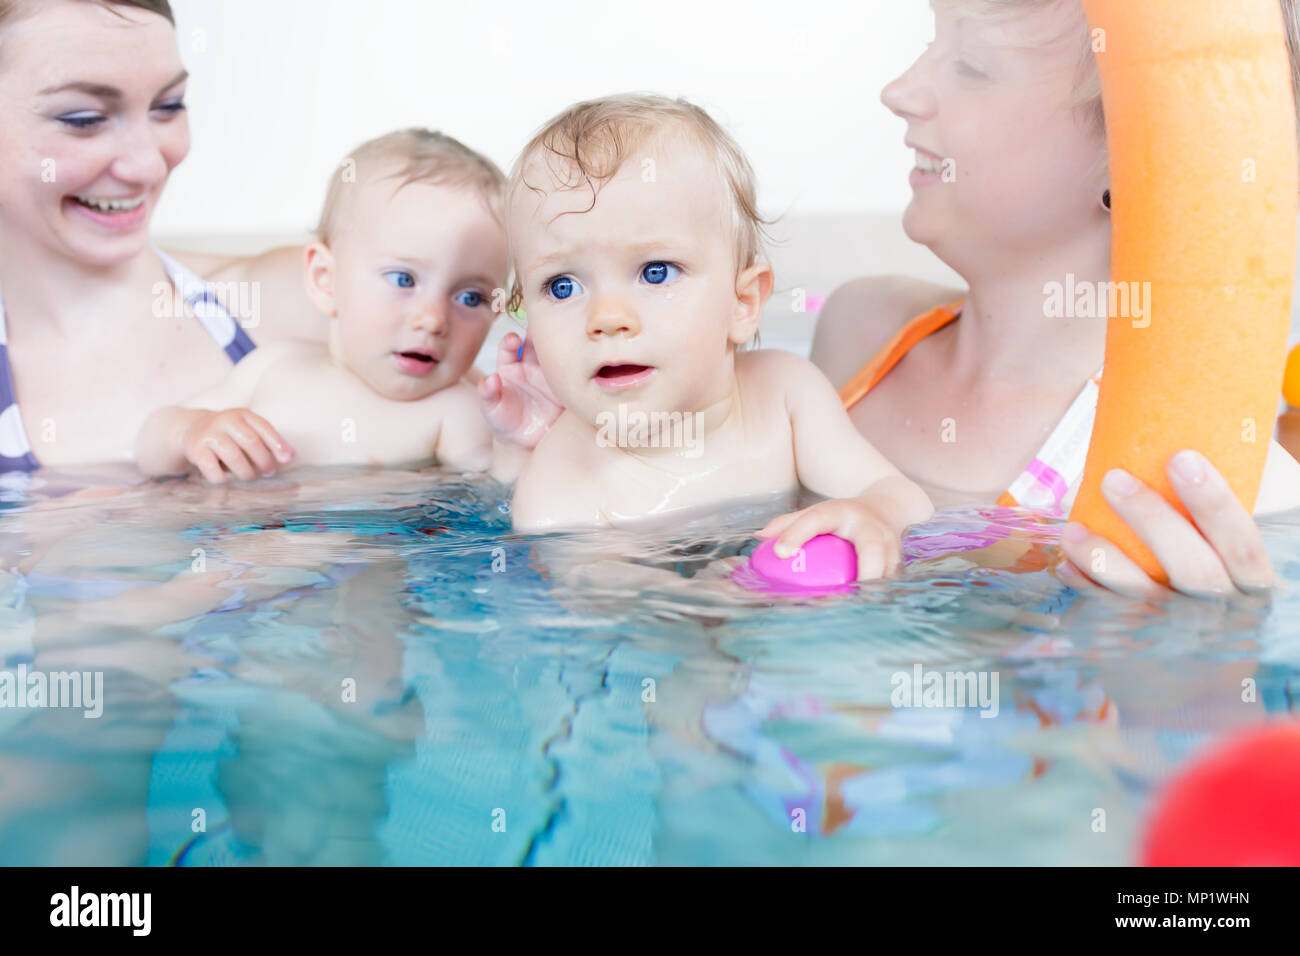 Mothers being happy about their babies playing with each other Stock Photo